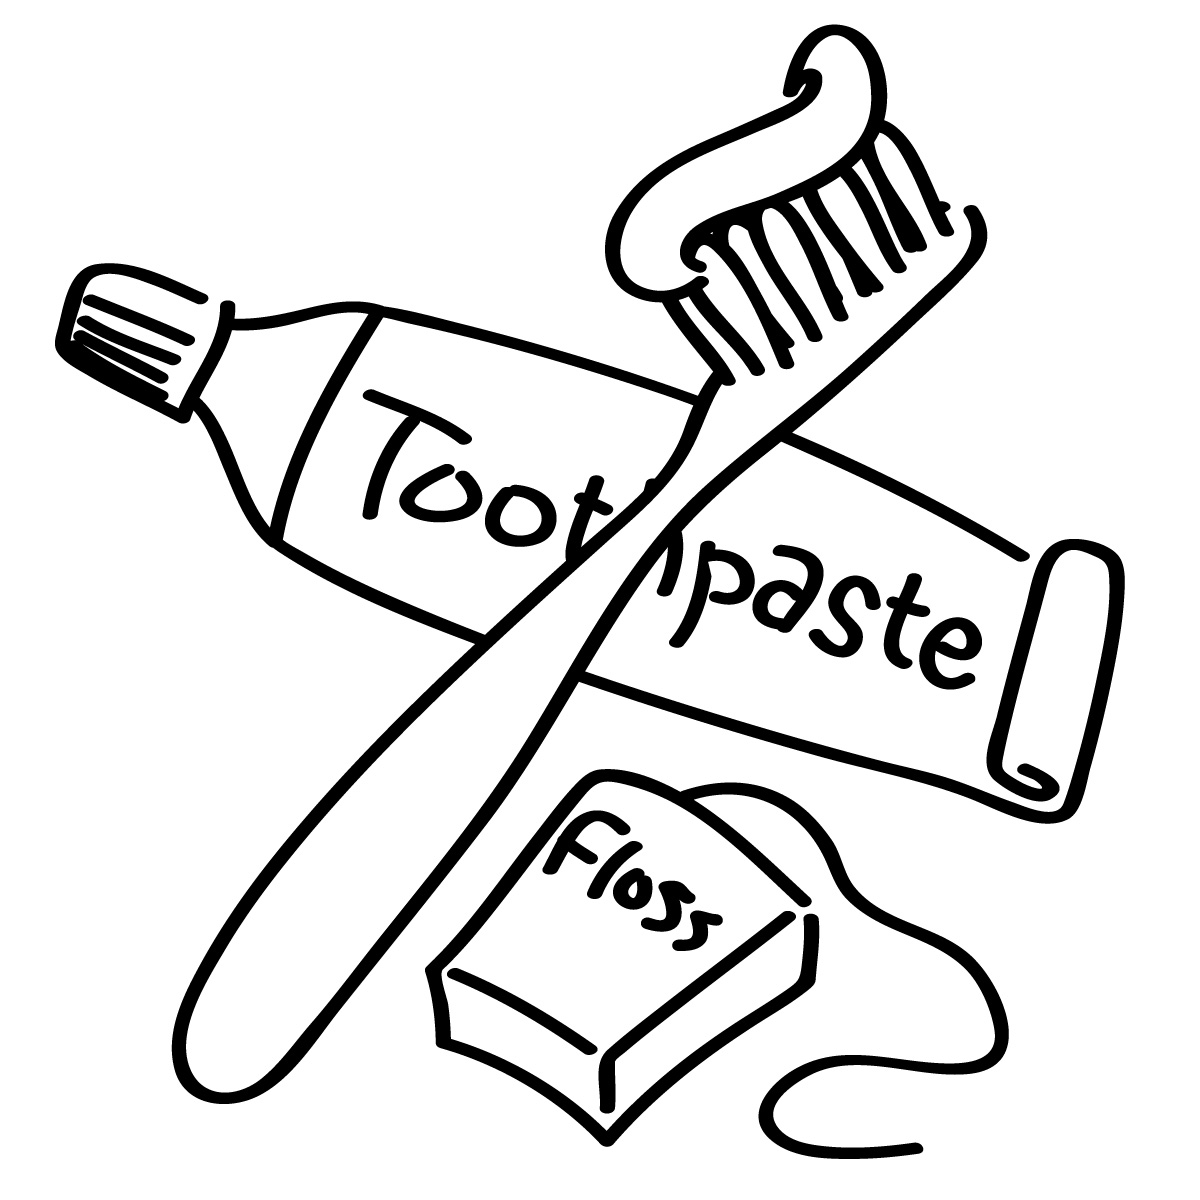 Brush teeth brushing teeth coloring pages 4fbb8 clip art image 